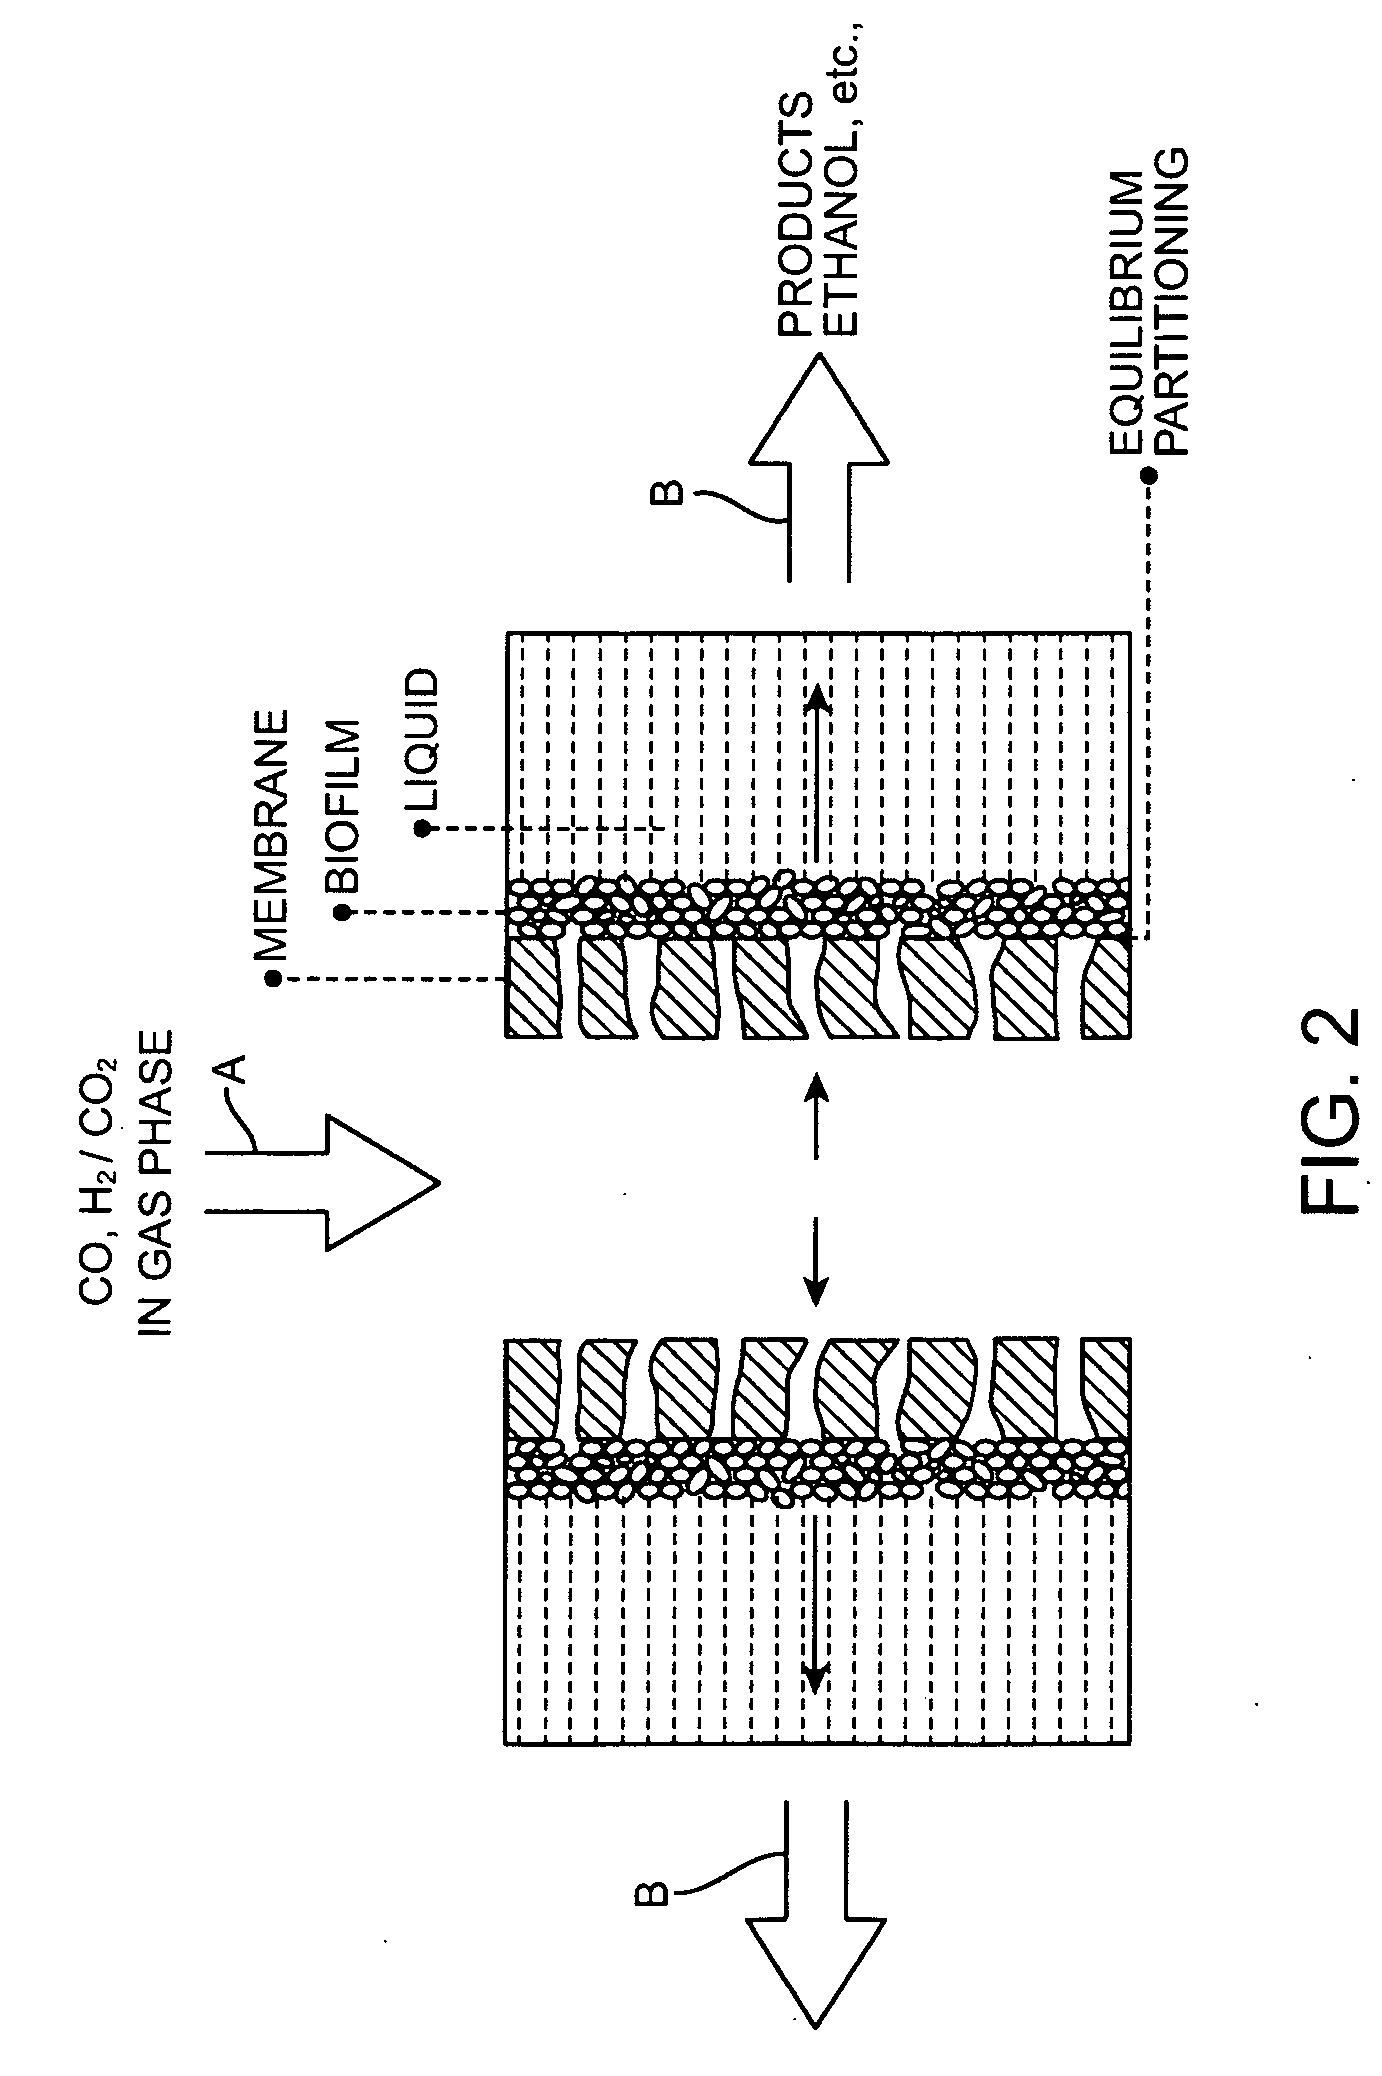 Process to sequence bioreactor modules for serial gas flow and uniform gas velocity